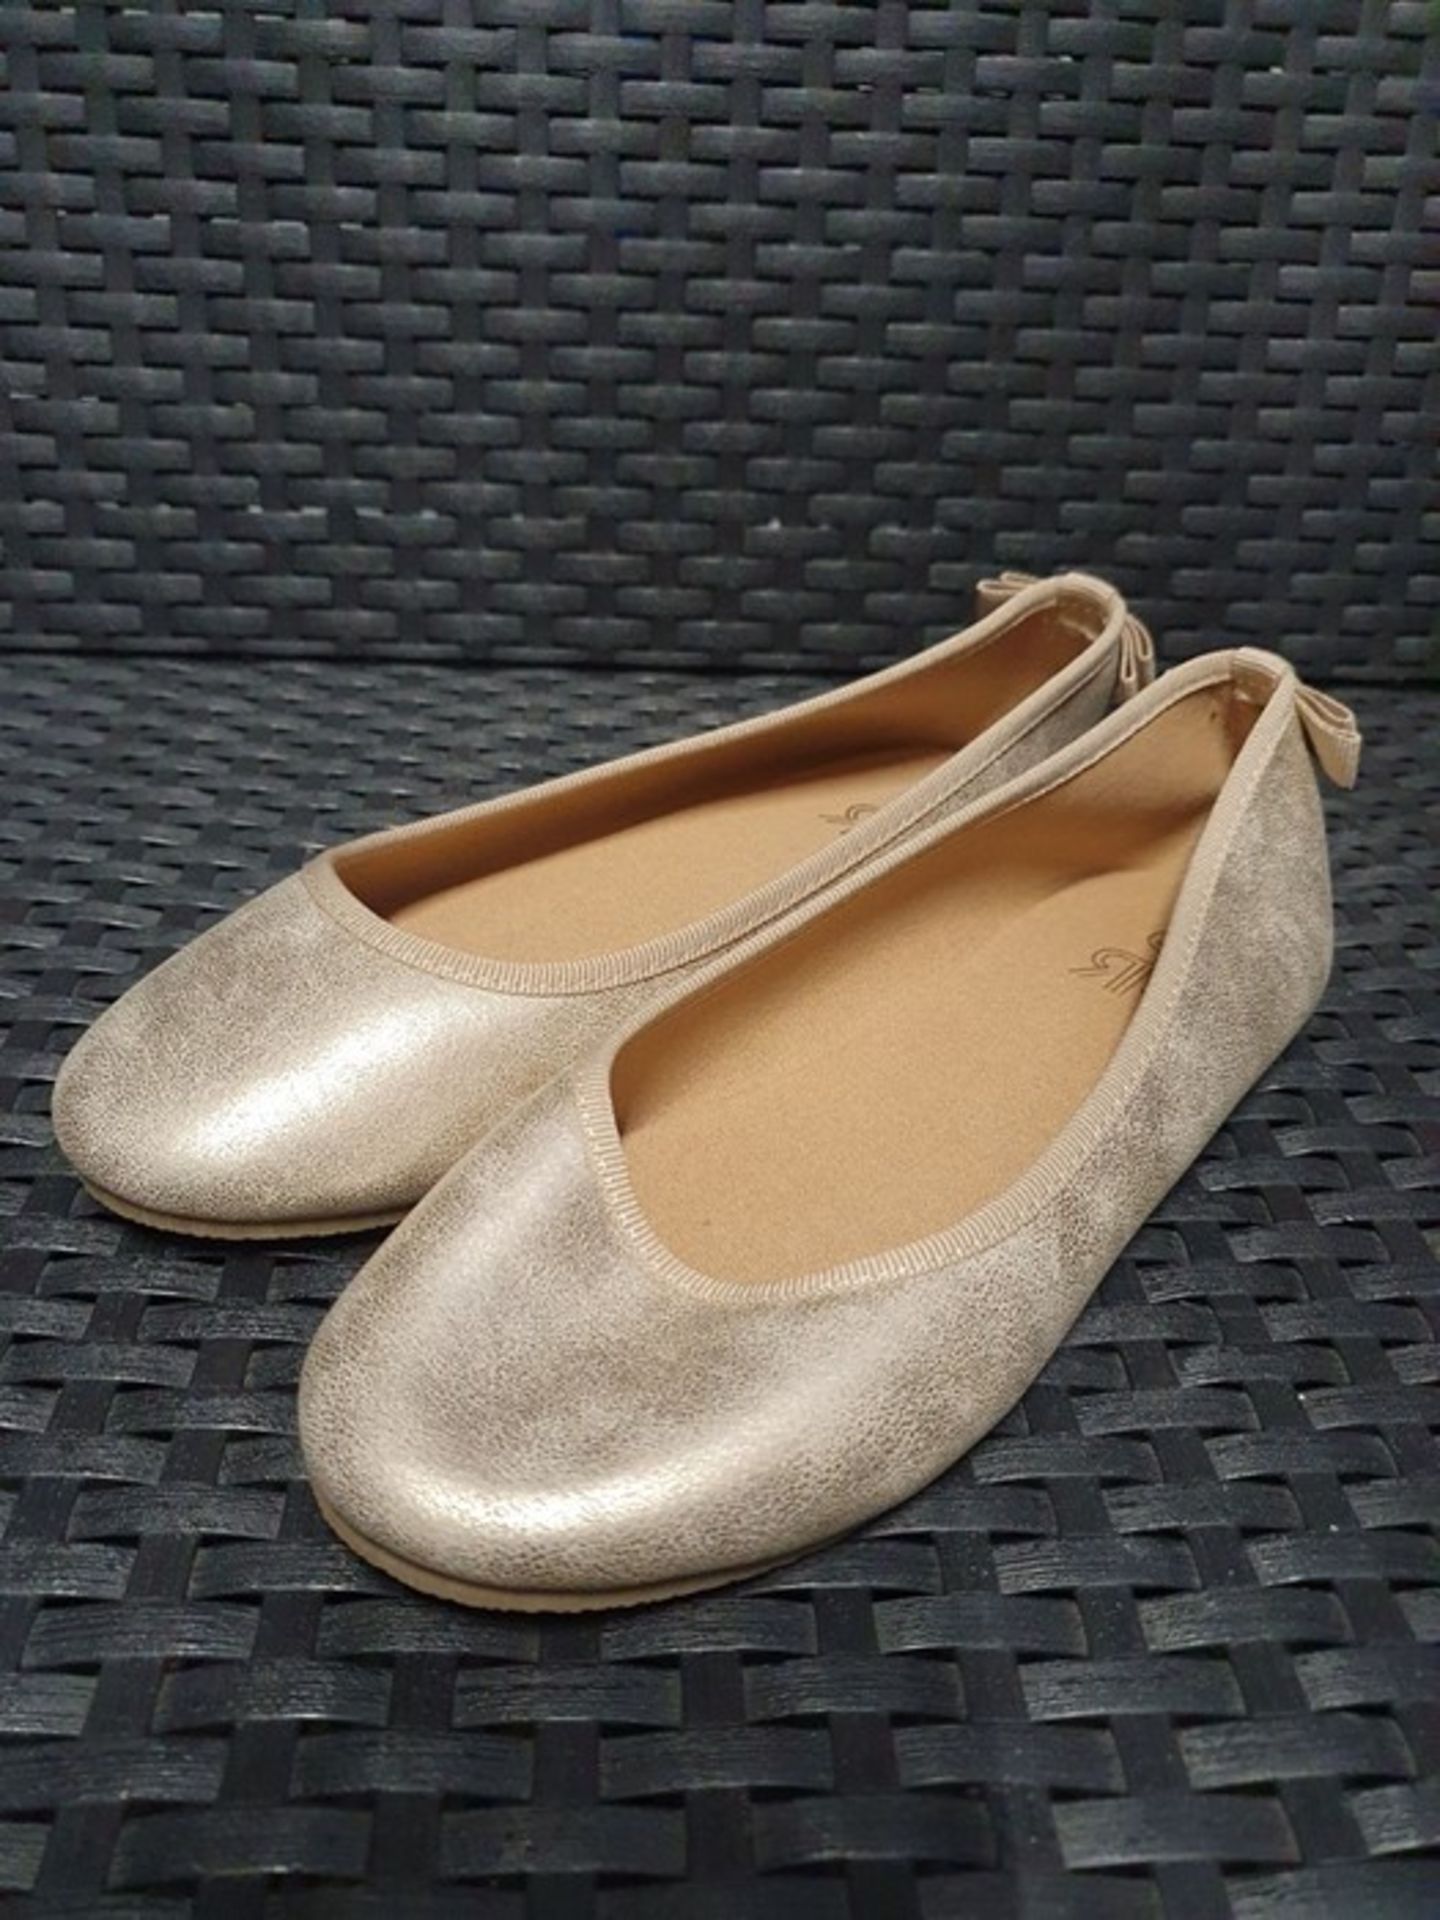 ONE PAIR OF LA REDOUTE COLLECTIONS BALLET FLATS IN GOLD - SIZE UK 4. RRP £15.00. GRADE A* - AS